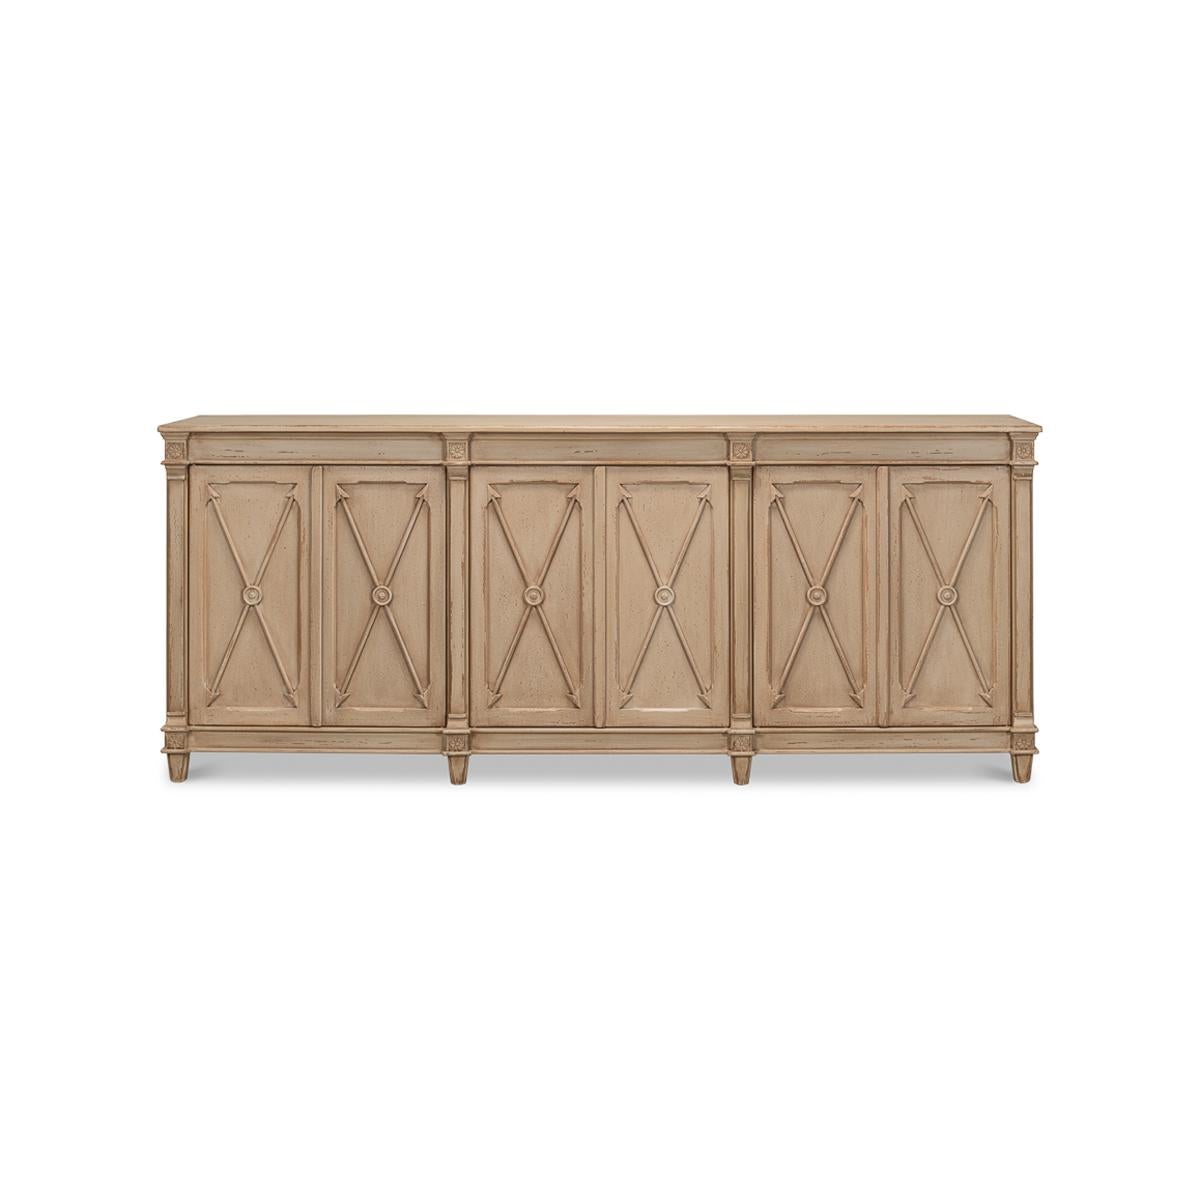 Antiqued Buffet with a hand rubbed and distressed dark beige finish to the six-door cabinet, each with a cross arrow design. This piece is crafted in pine and has an antiqued rustic finish. The painted interior is fitted with removable